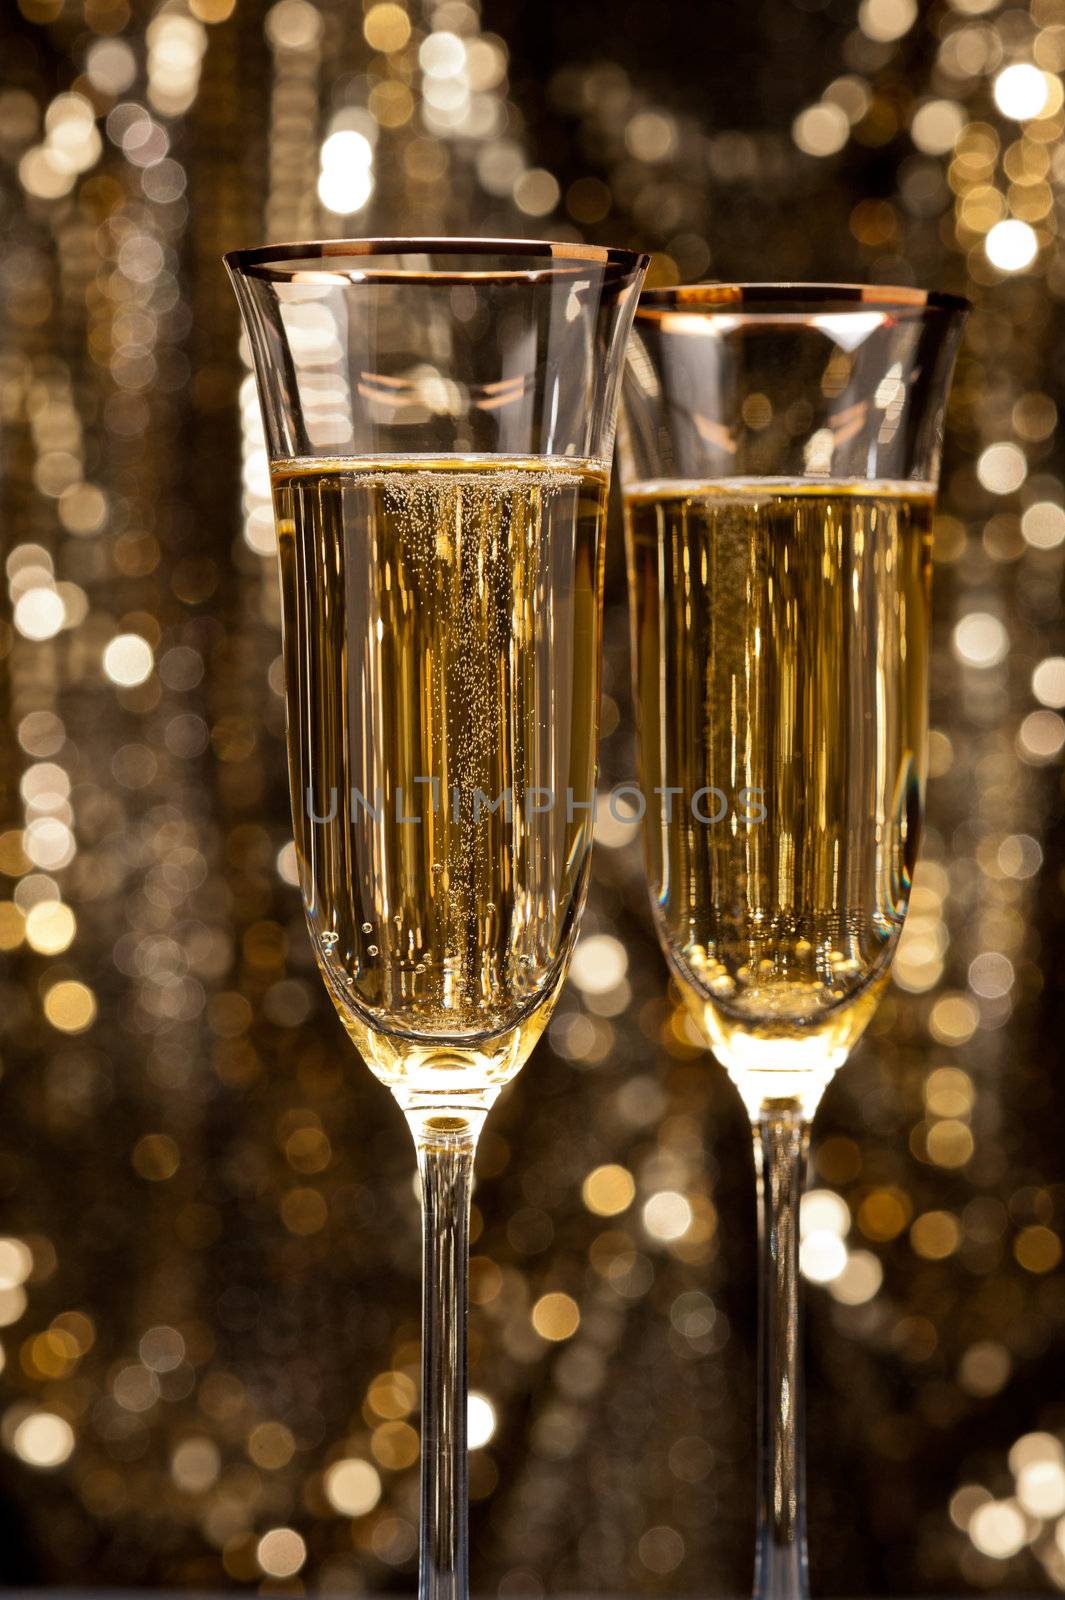 Champagne glasses in front of gold glitter background